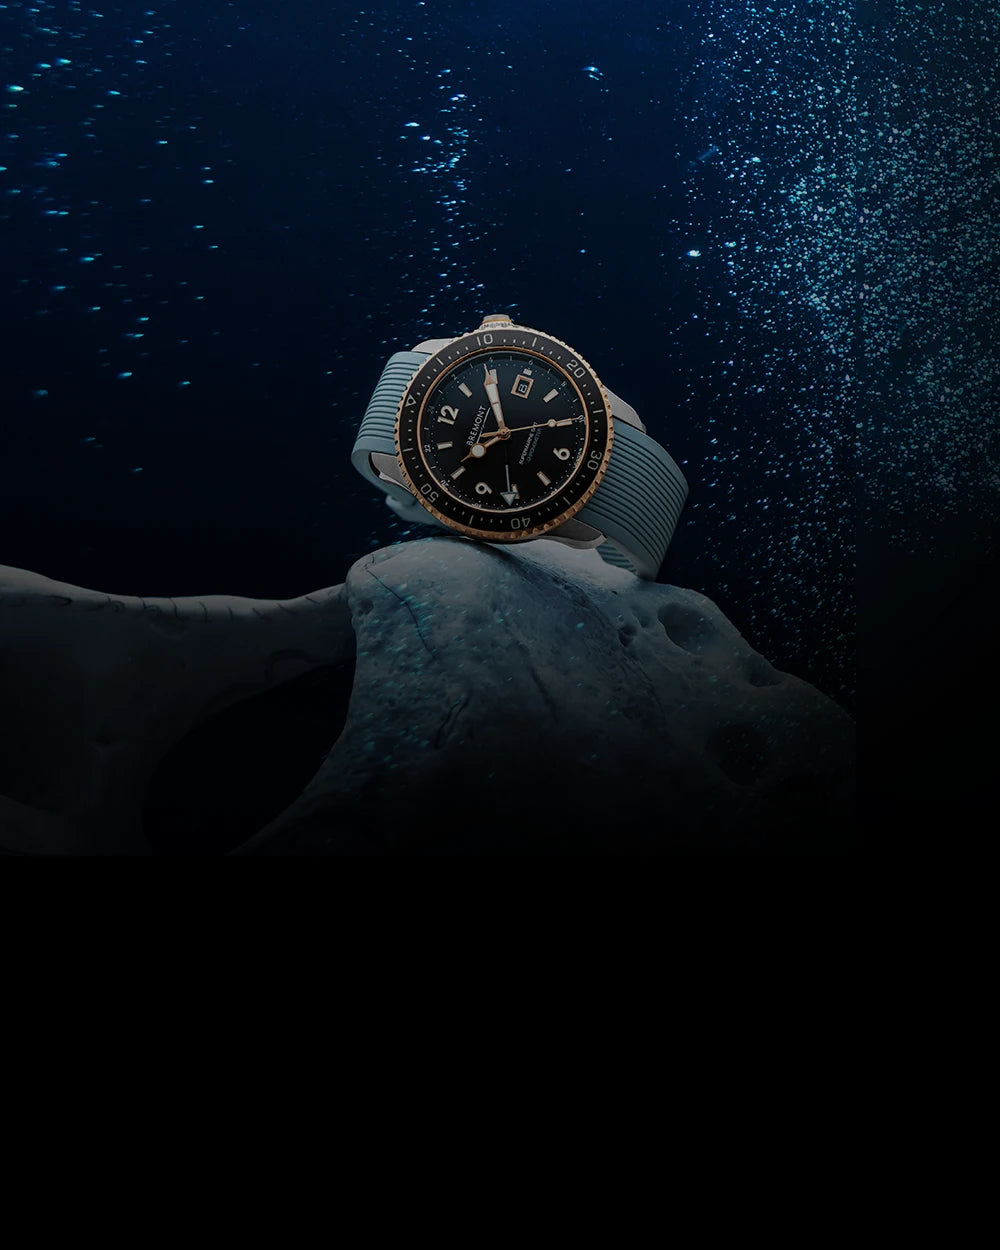 Extra Water-Resistant Diving Watches to over 1400m.